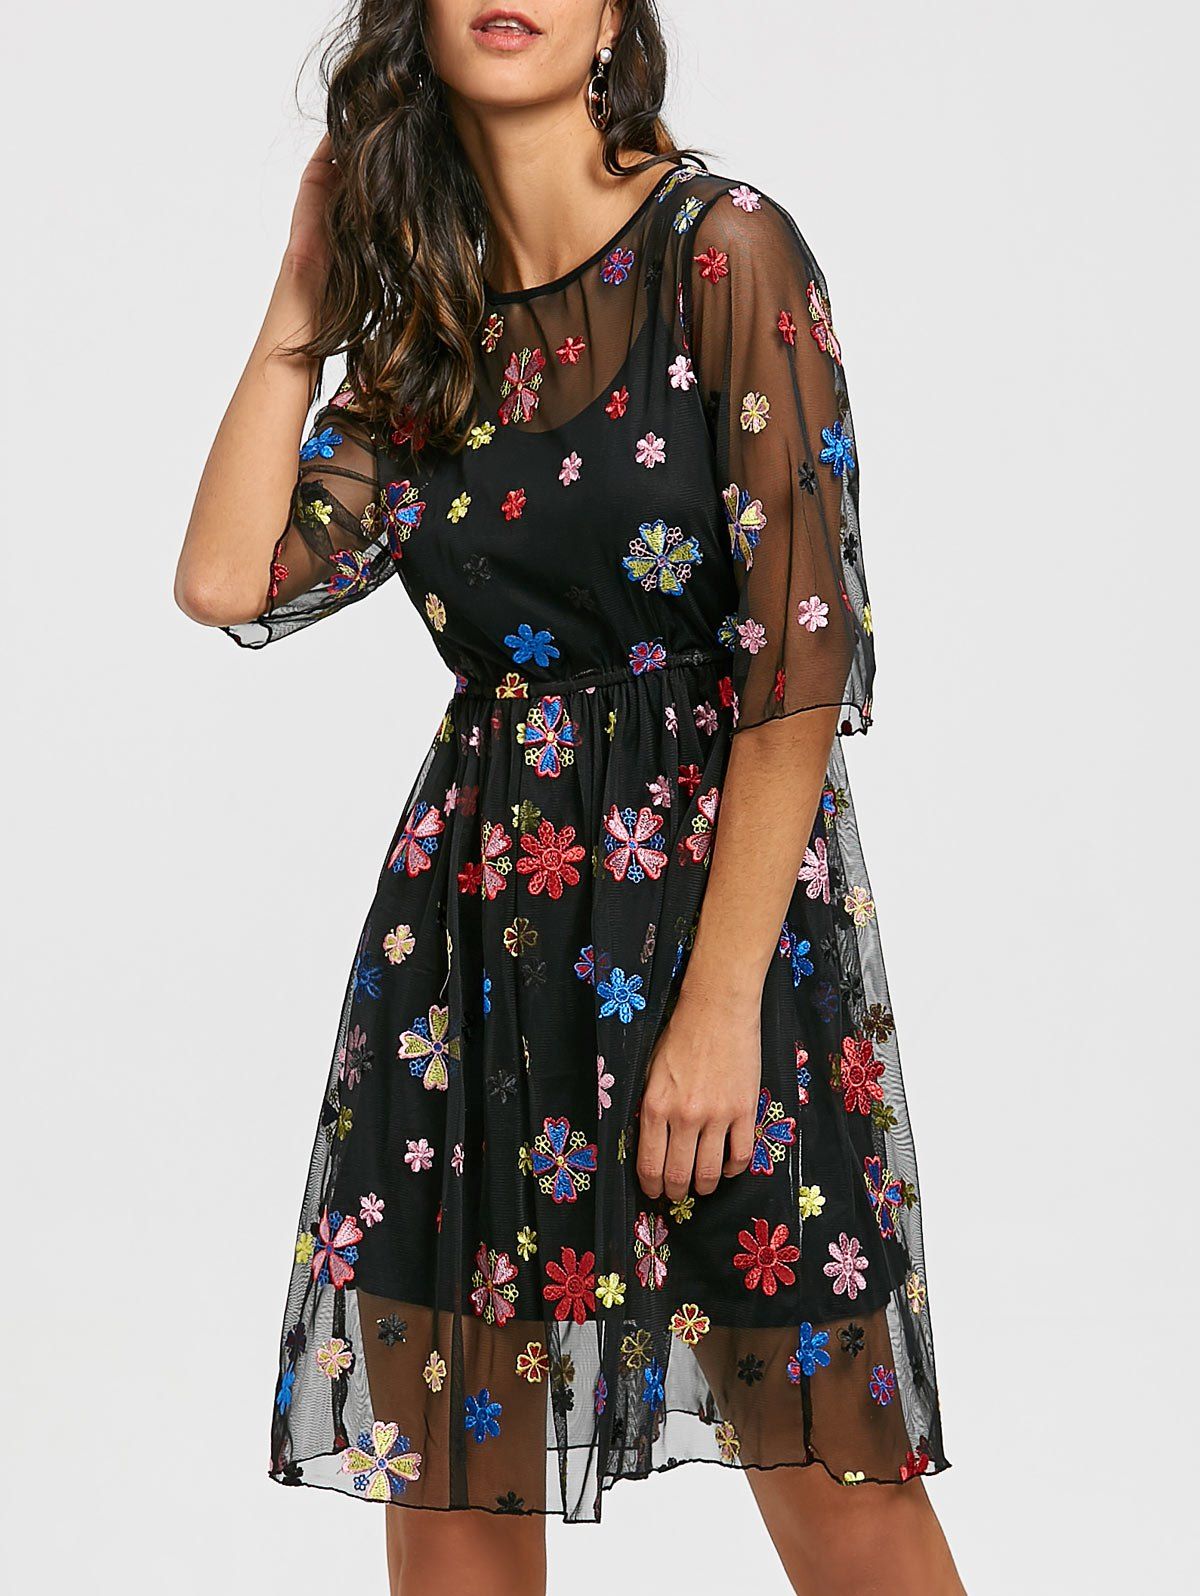 See Thru Embroidery Floral Dress and Cami Dress - BLACK XL